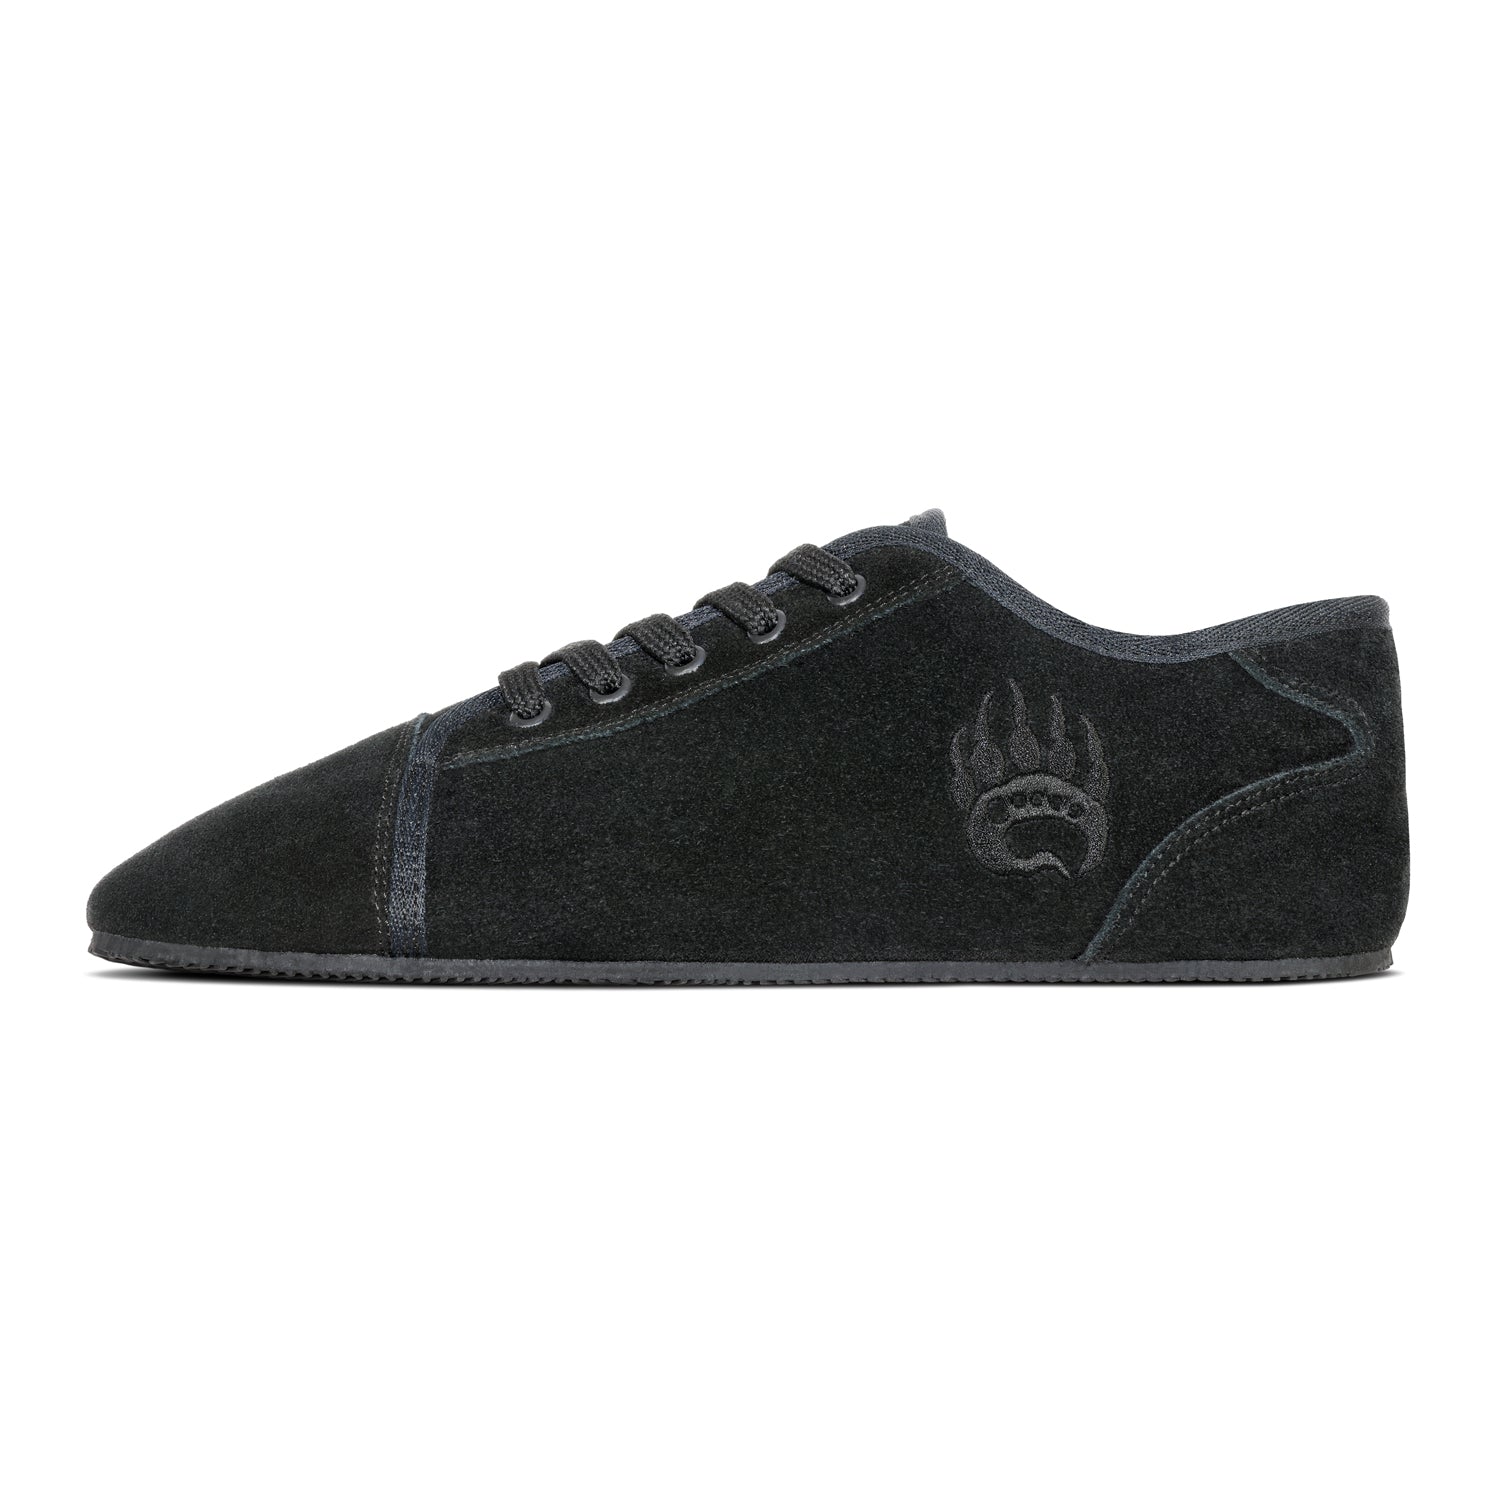 Side view of a dark gray Bearfoot Ursus Suede low-top sneakers with black laces and a distinct logo on the side, designed for strength athletes.